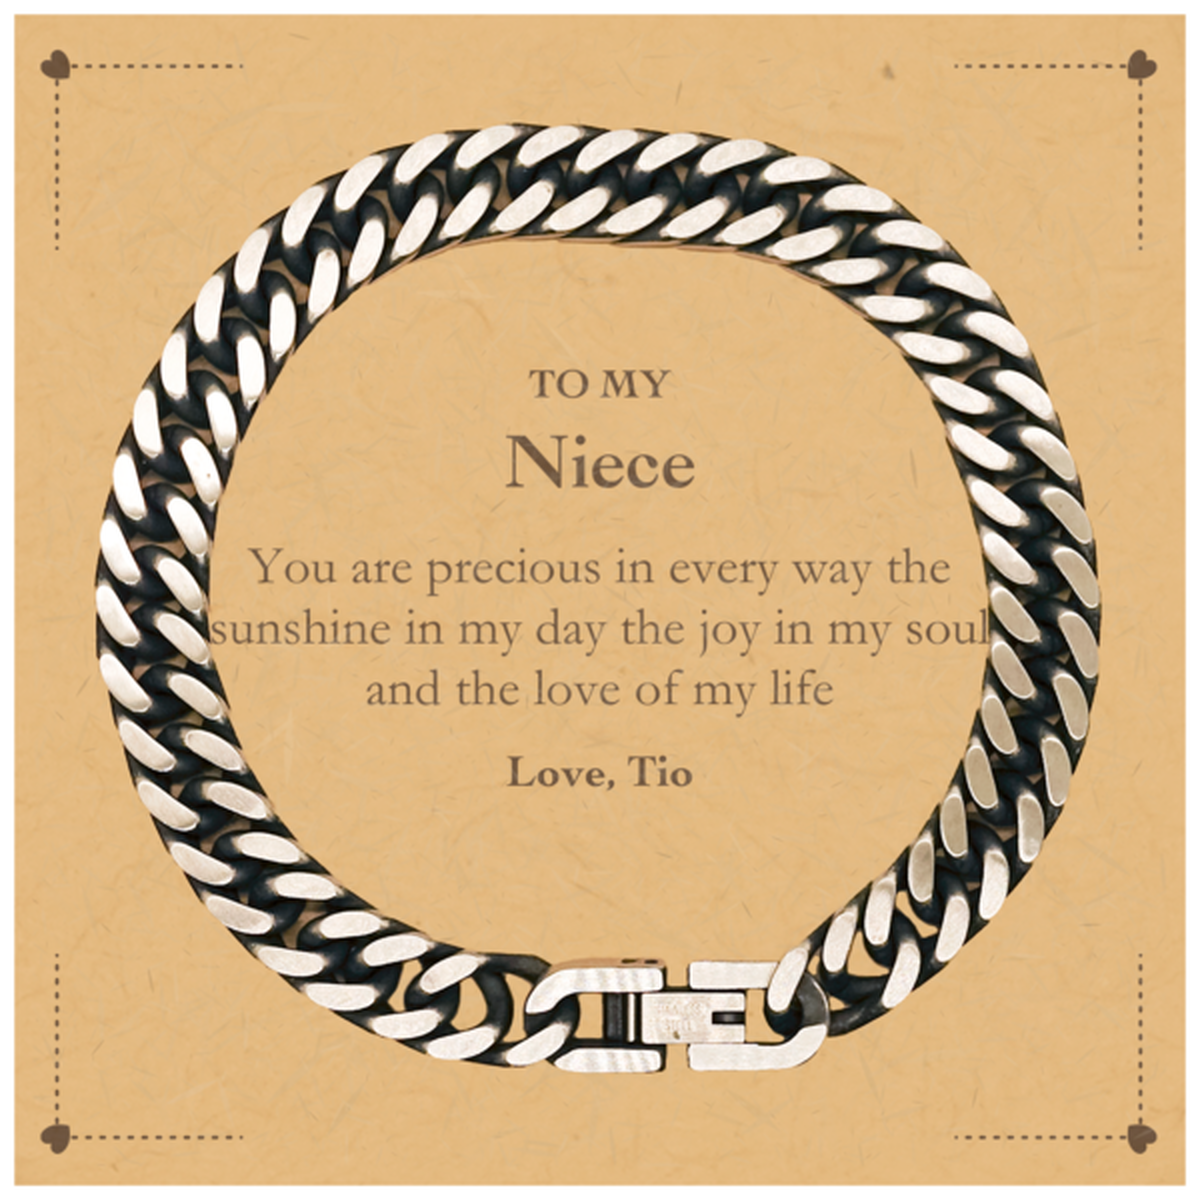 Graduation Gifts for Niece Cuban Link Chain Bracelet Present from Tio, Christmas Niece Birthday Gifts Niece You are precious in every way the sunshine in my day. Love, Tio